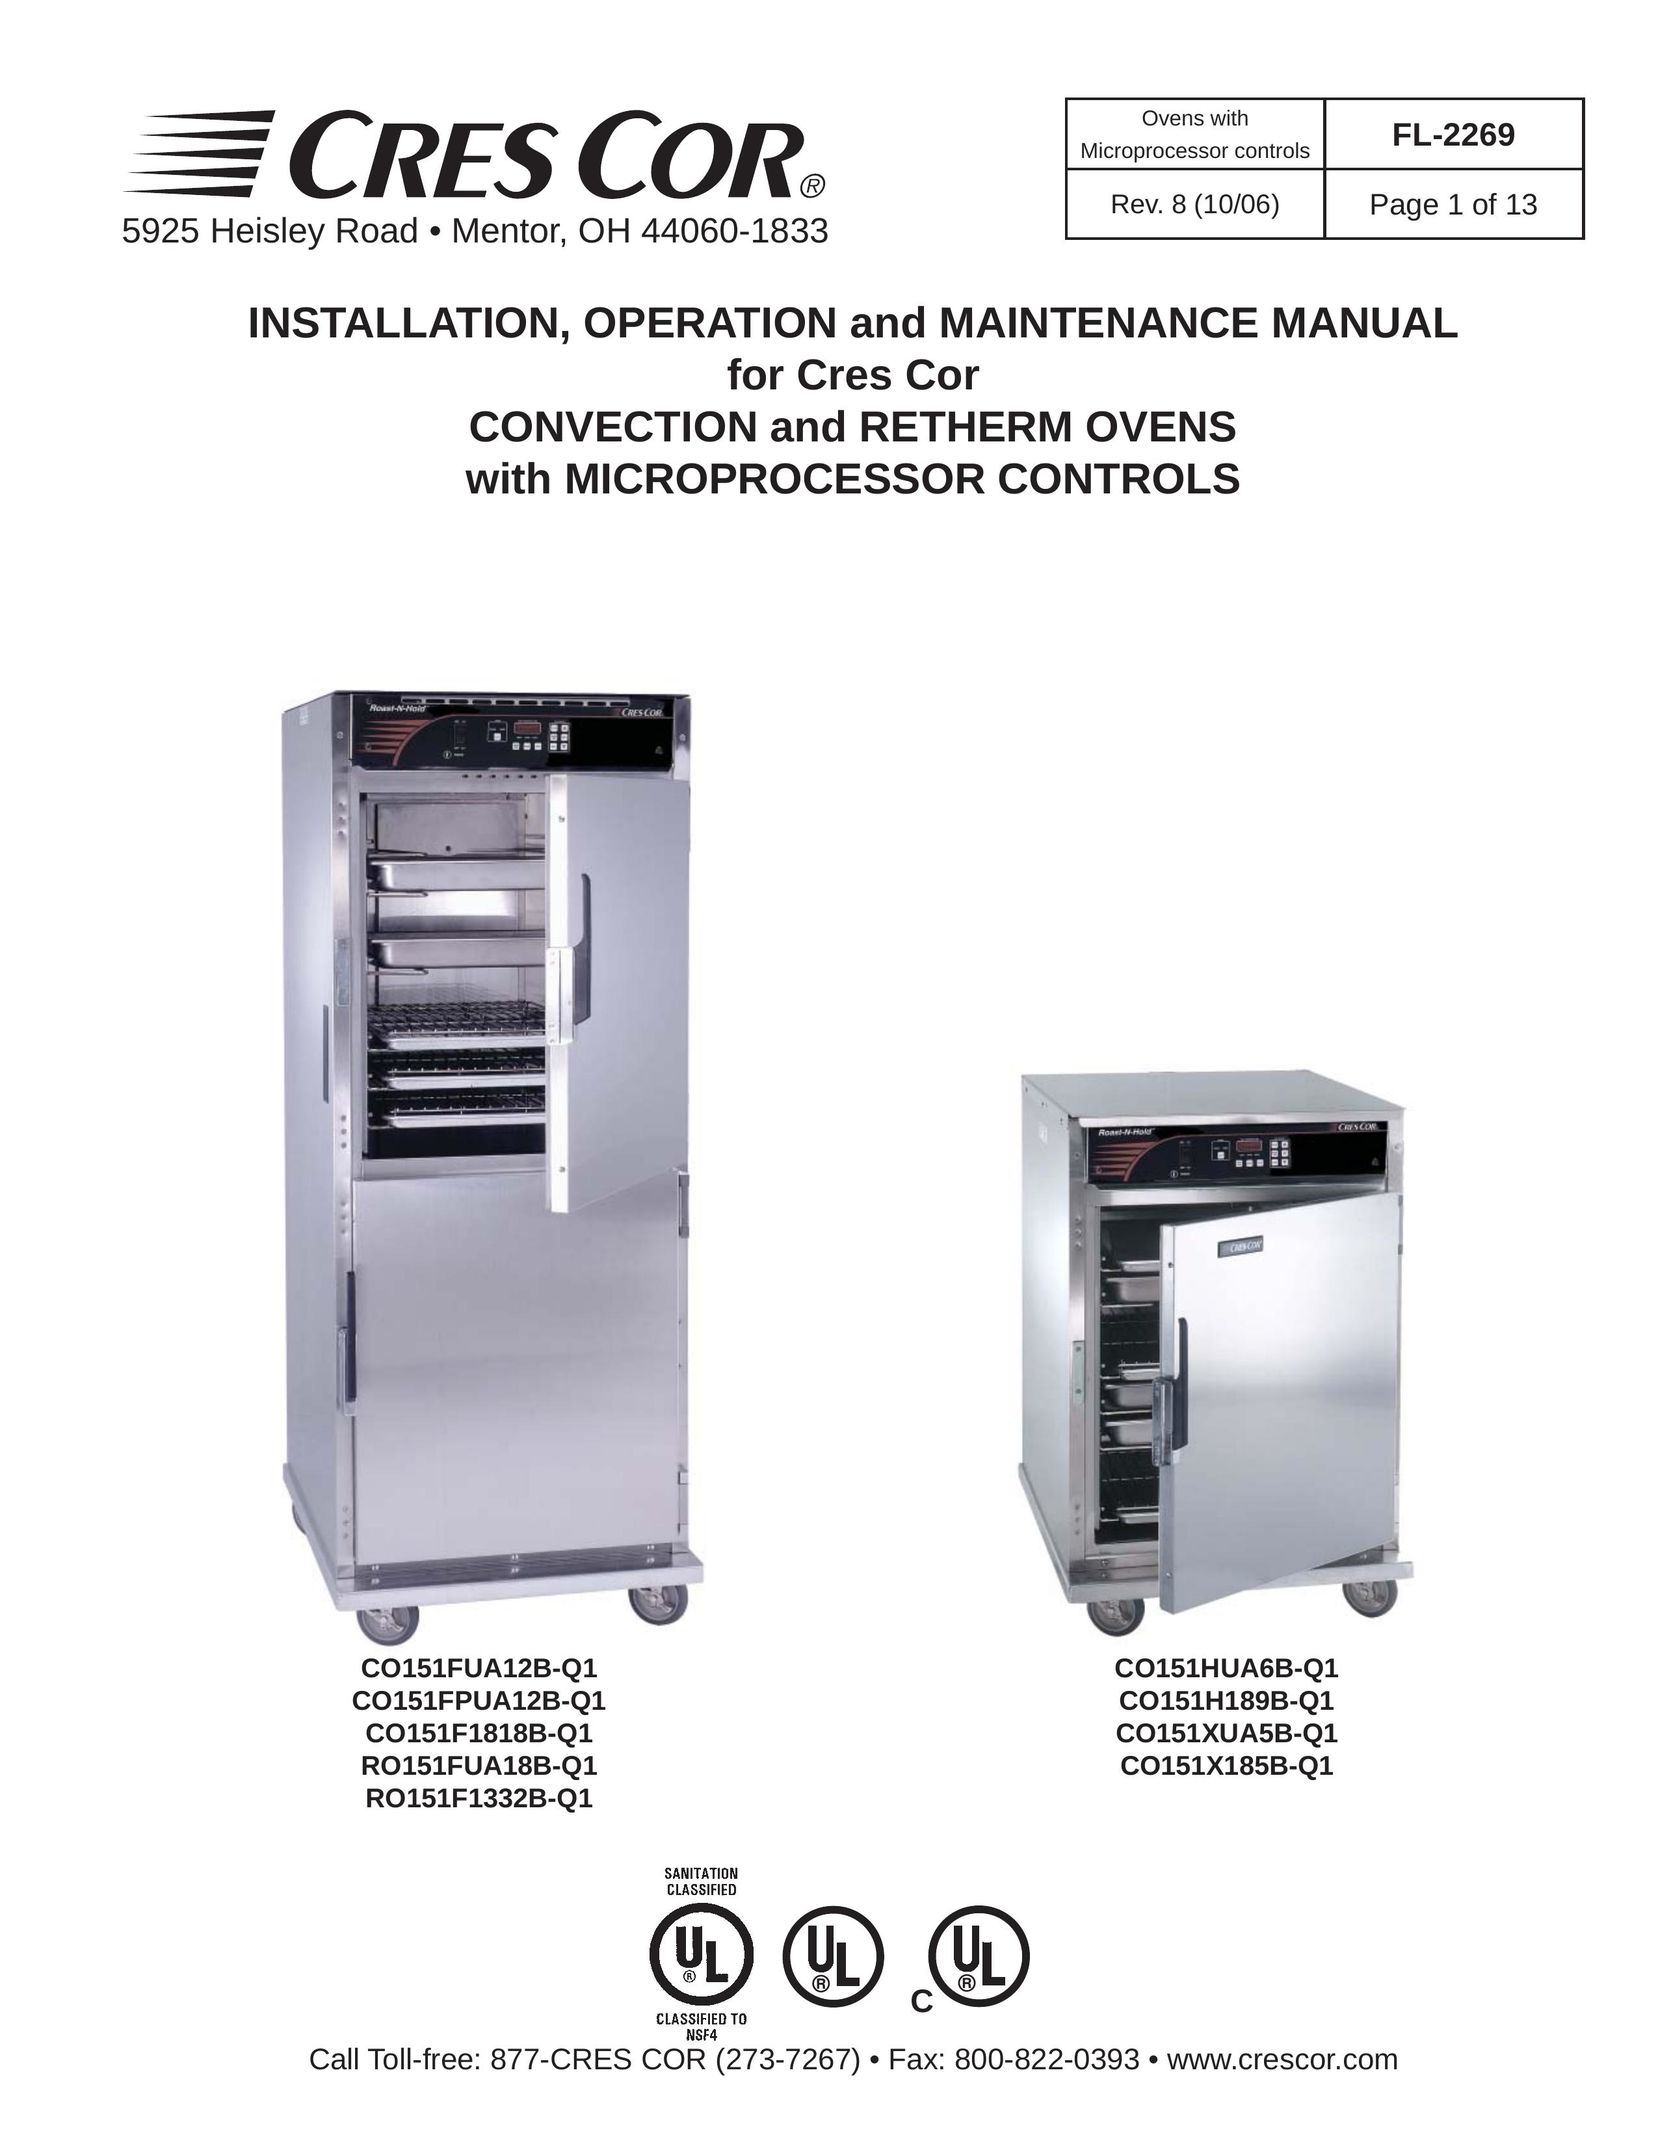 Cres Cor CO151H189B-Q1 Convection Oven User Manual